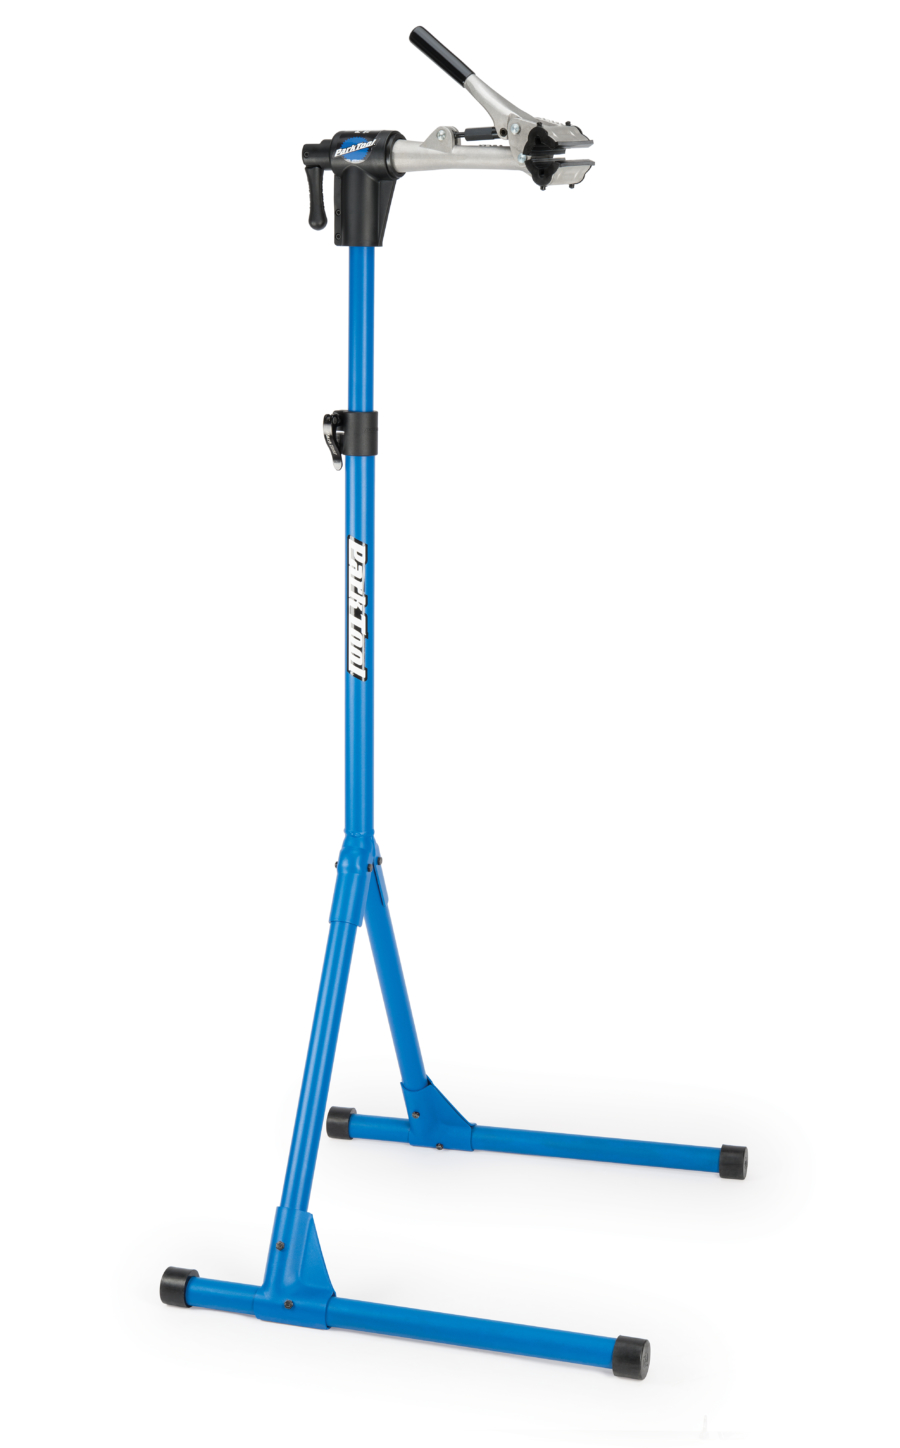 The Park Tool PCS-4-1 Deluxe Home Mechanic Repair Stand, enlarged